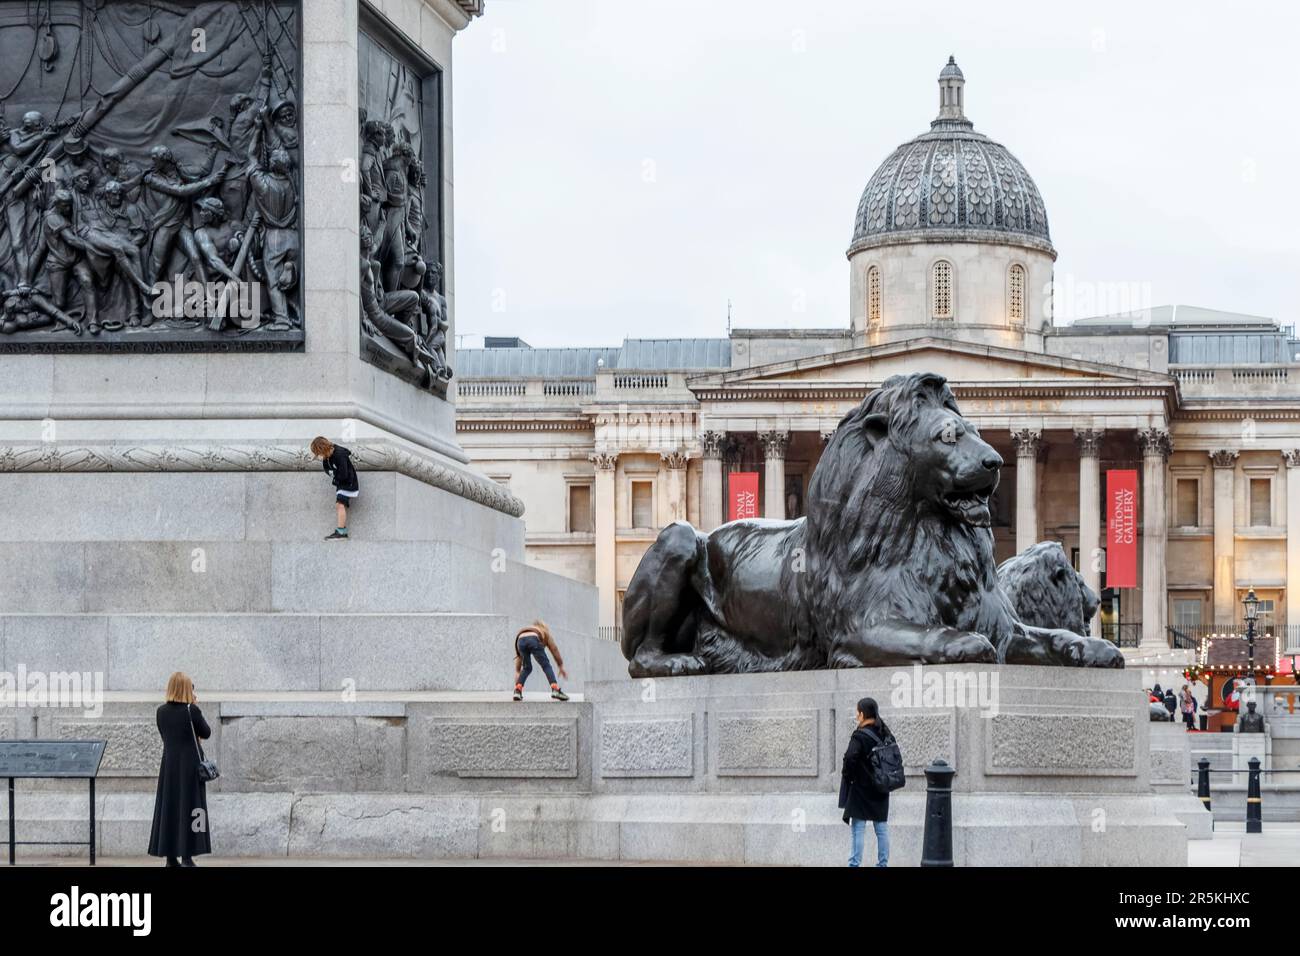 Children climb and play on the plinth of Nelson's Column in Trafalgar Square, London, UK Stock Photo